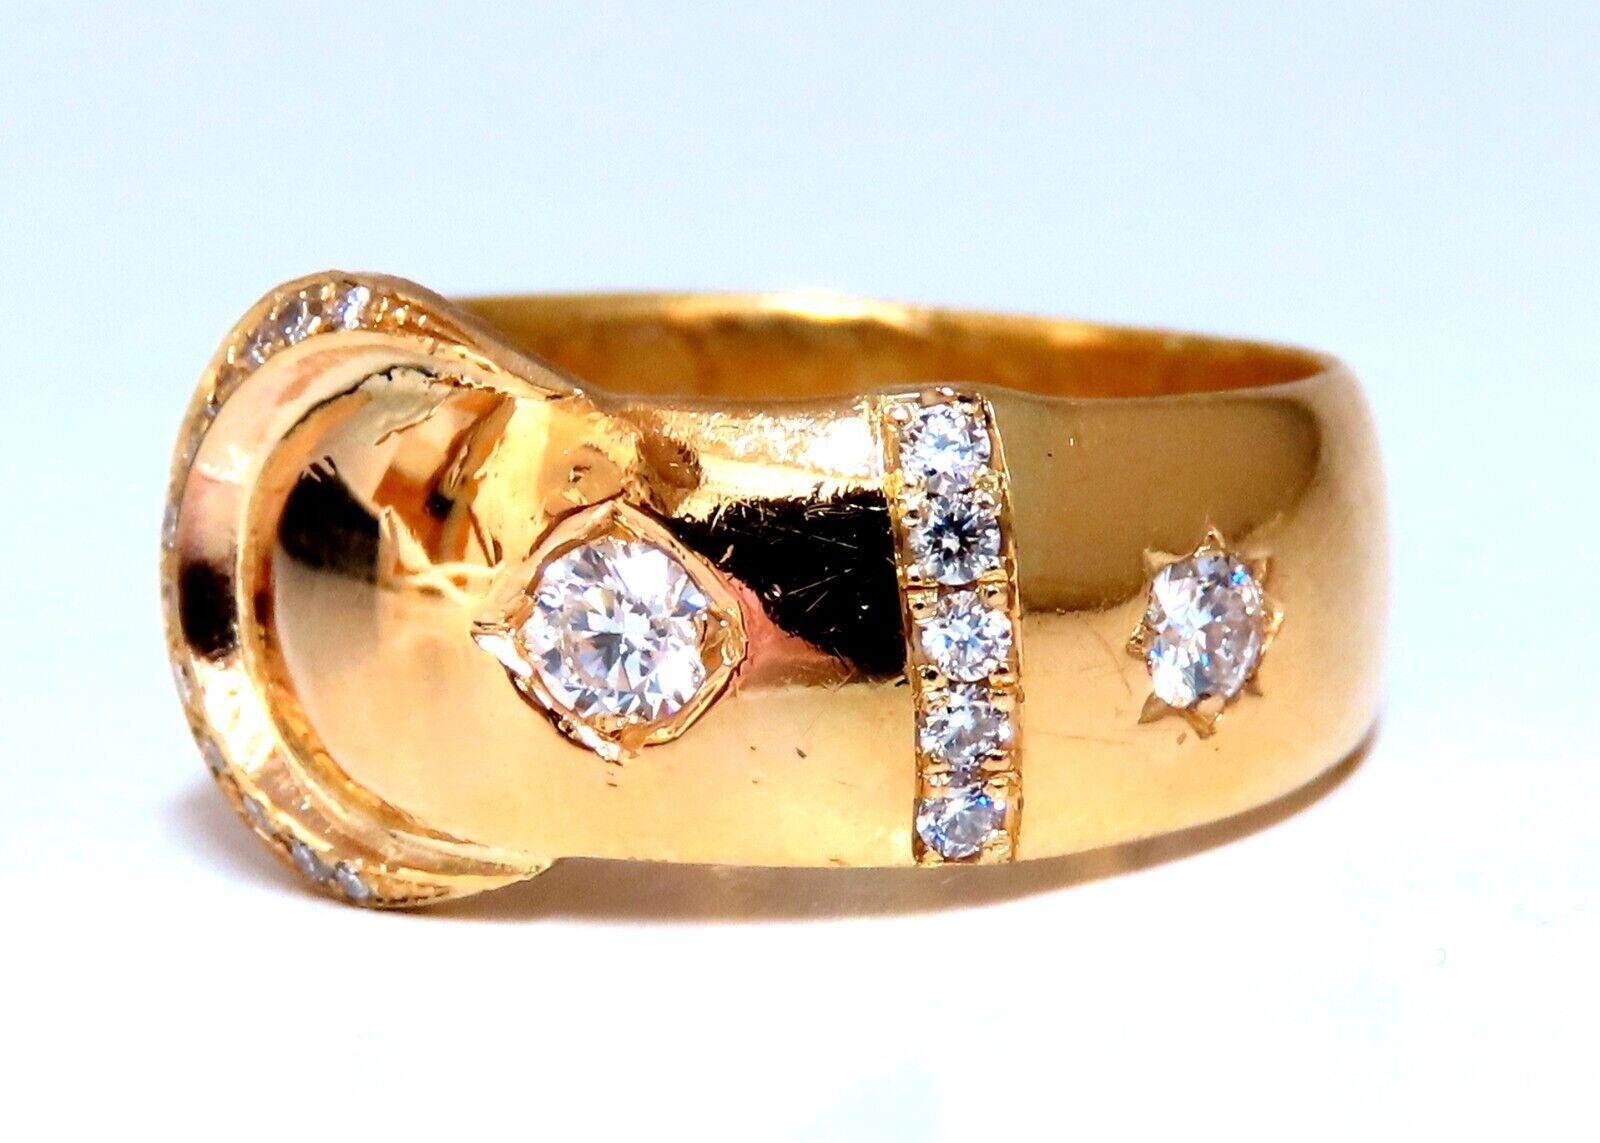 Crescent & Star 

Made in England 

.40ct Natural Round Cut Diamond Vintage Ring

Vs-2 clarity G color.

18kt yellow gold

6 Grams

Band: 10mm wide

Depth: 1.3mm

Current ring size: 5.5

May professionally resize, please inquire.